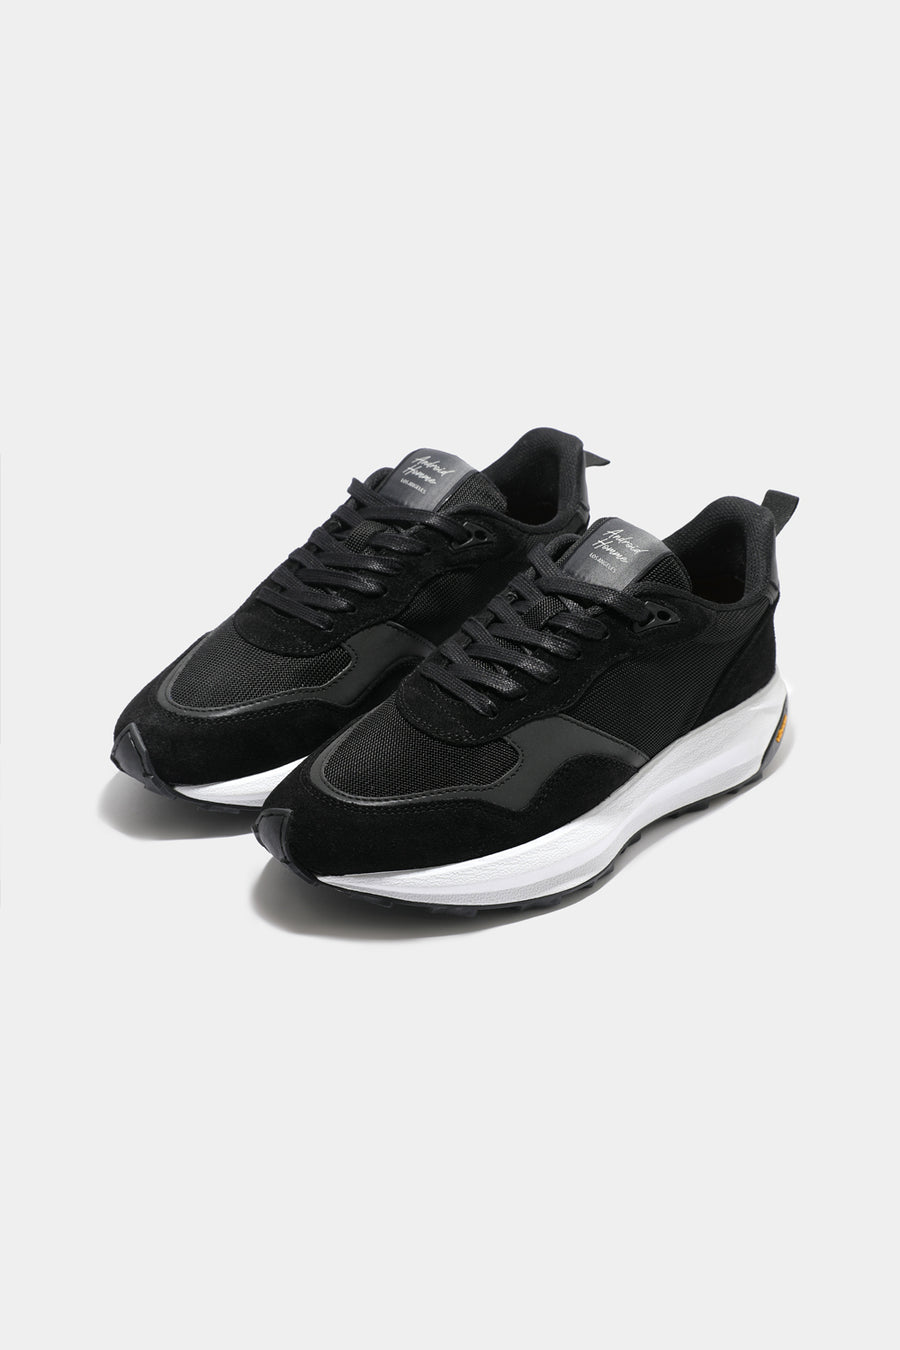 Buy the Android Homme Cascais Runner Black Suede Mesh Sneaker at Intro. Spend £50 for free UK delivery. Official stockists. We ship worldwide.